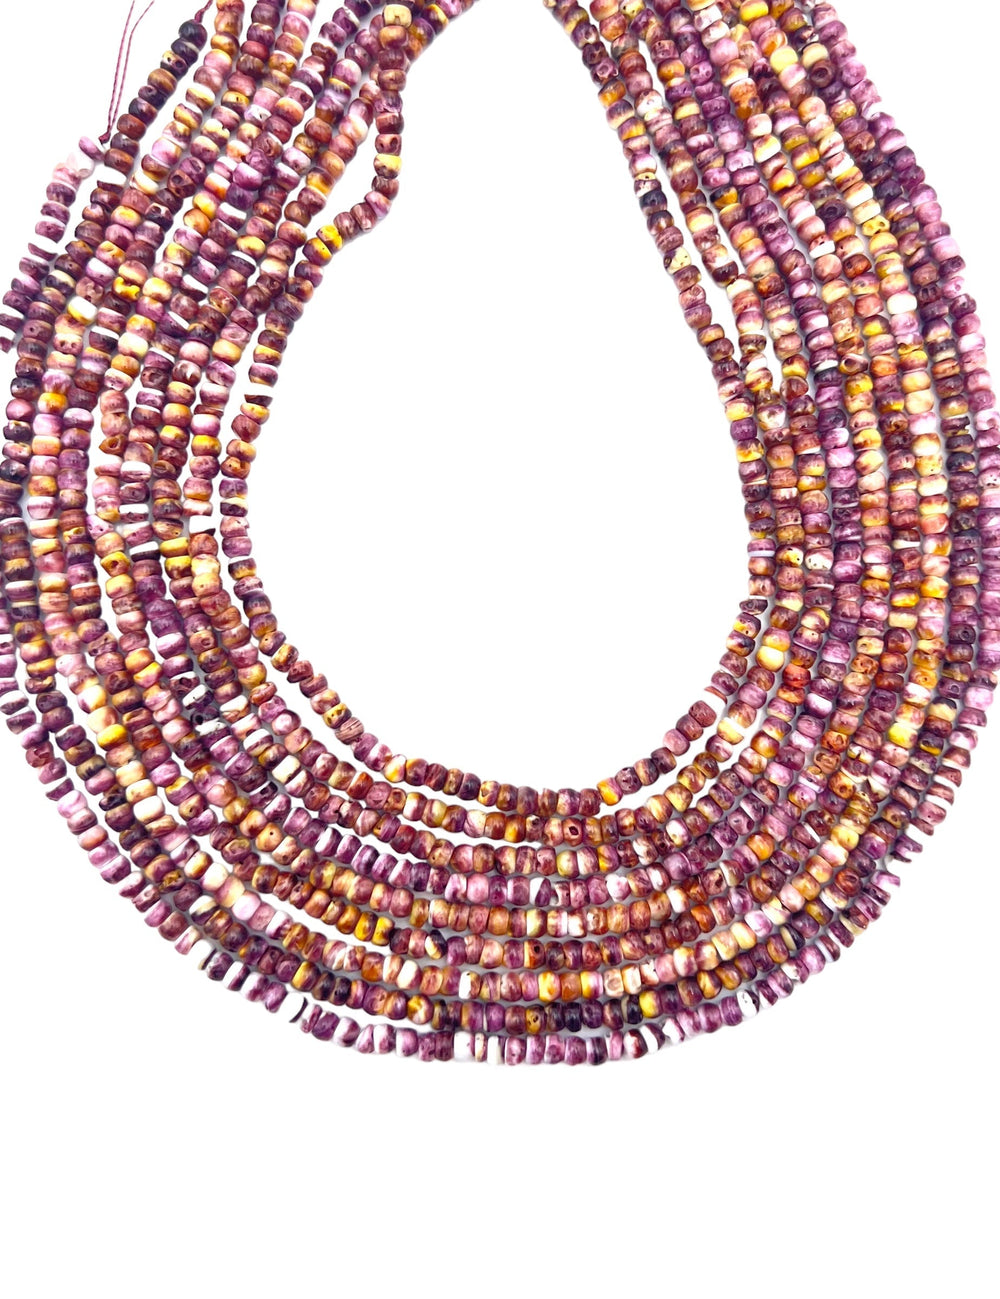 RARE Purple Spiny Oyster 4mm Irregular Rondel Beads 16 inch